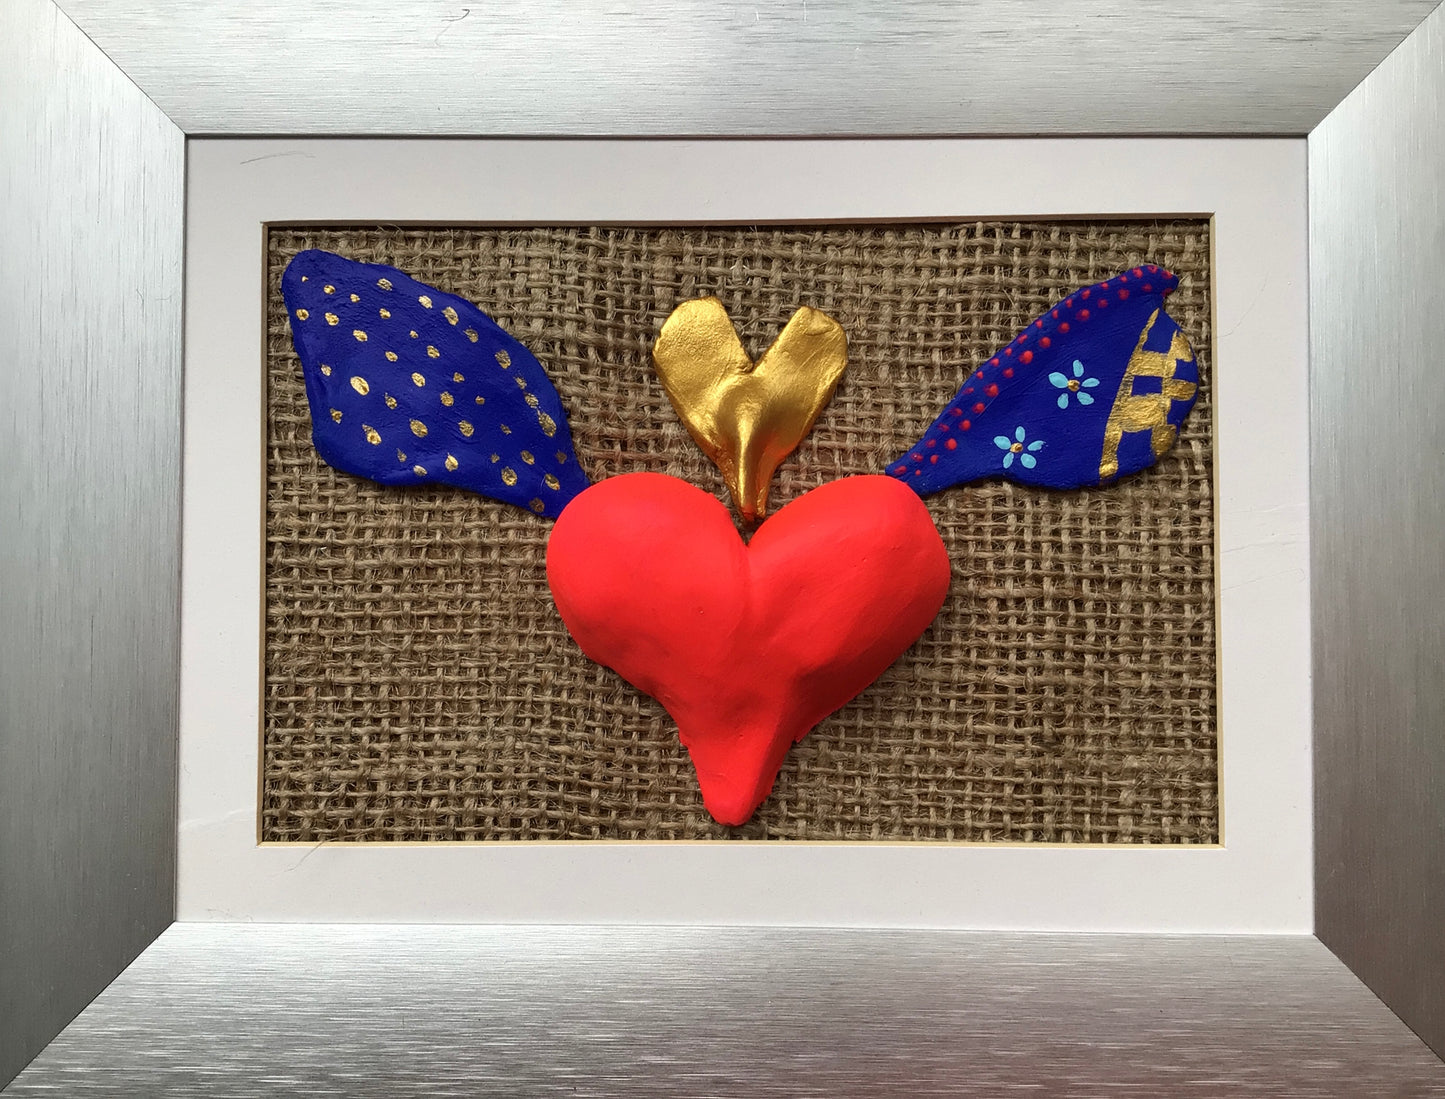 One of a kind: Handcrafted flying heart